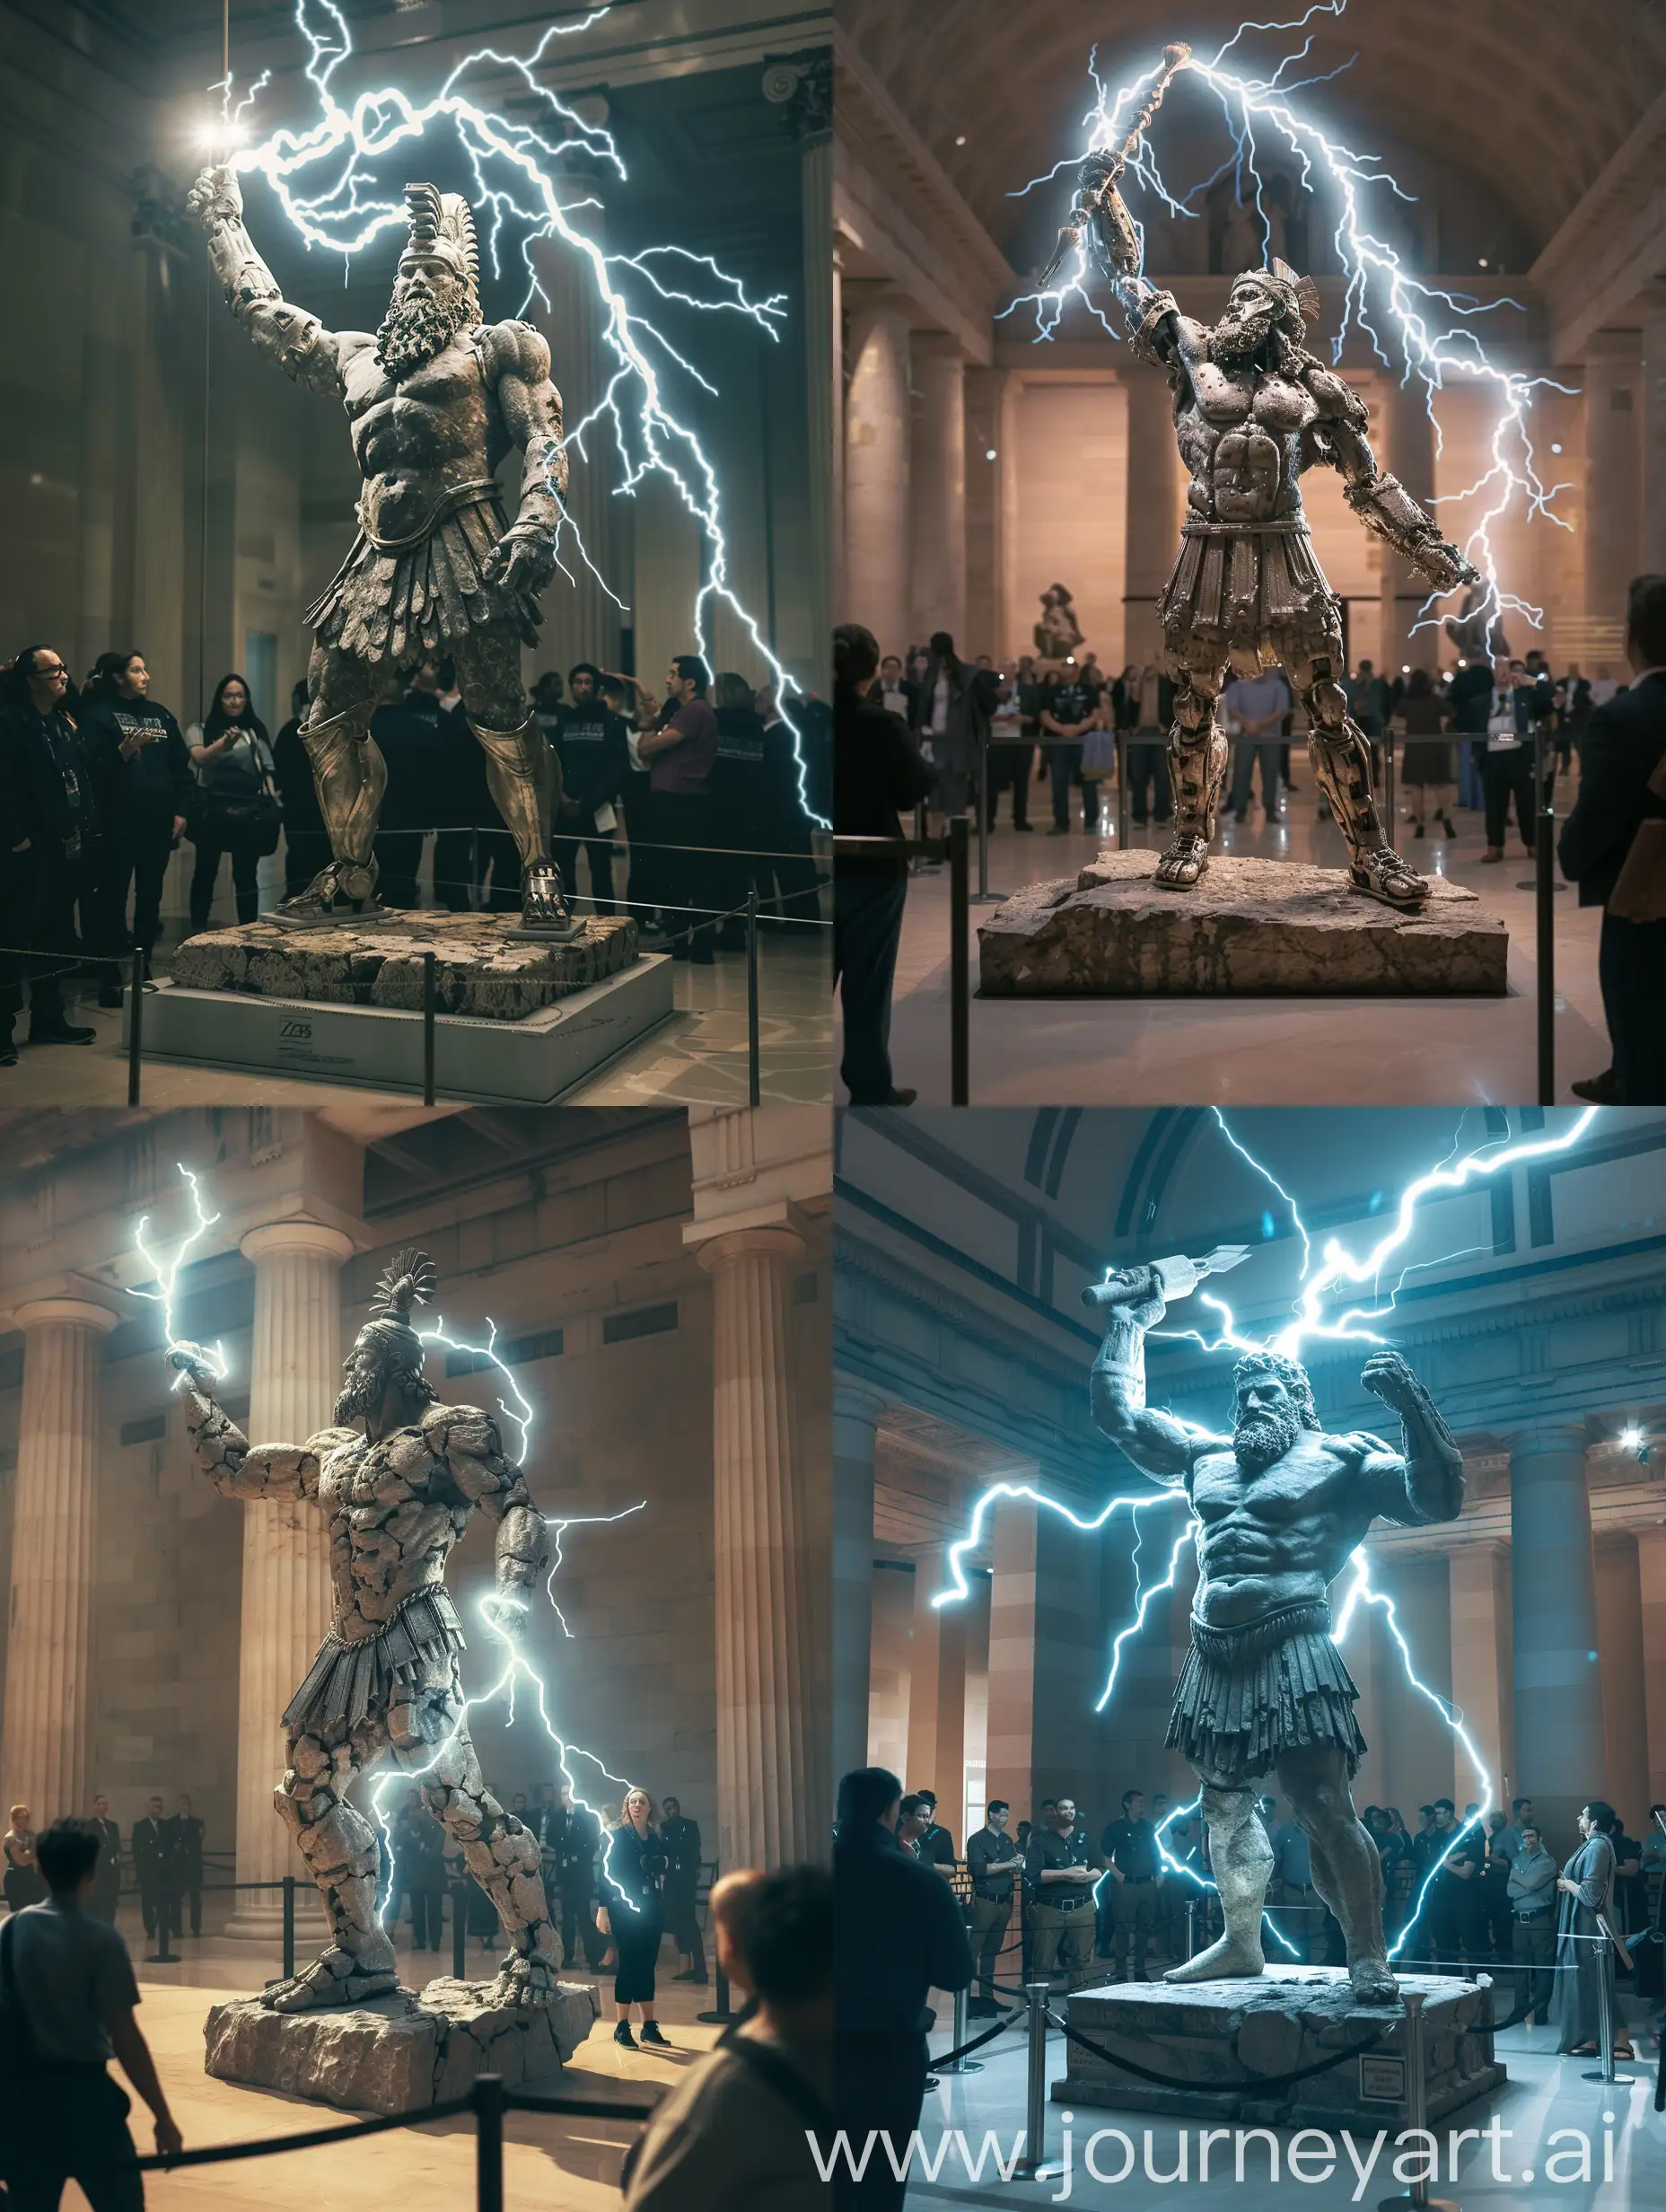 Zeus-the-Timeless-Deity-A-Cinematic-Fusion-of-Ancient-Stone-and-Futuristic-Robotics-in-the-Grand-Museum-Hall